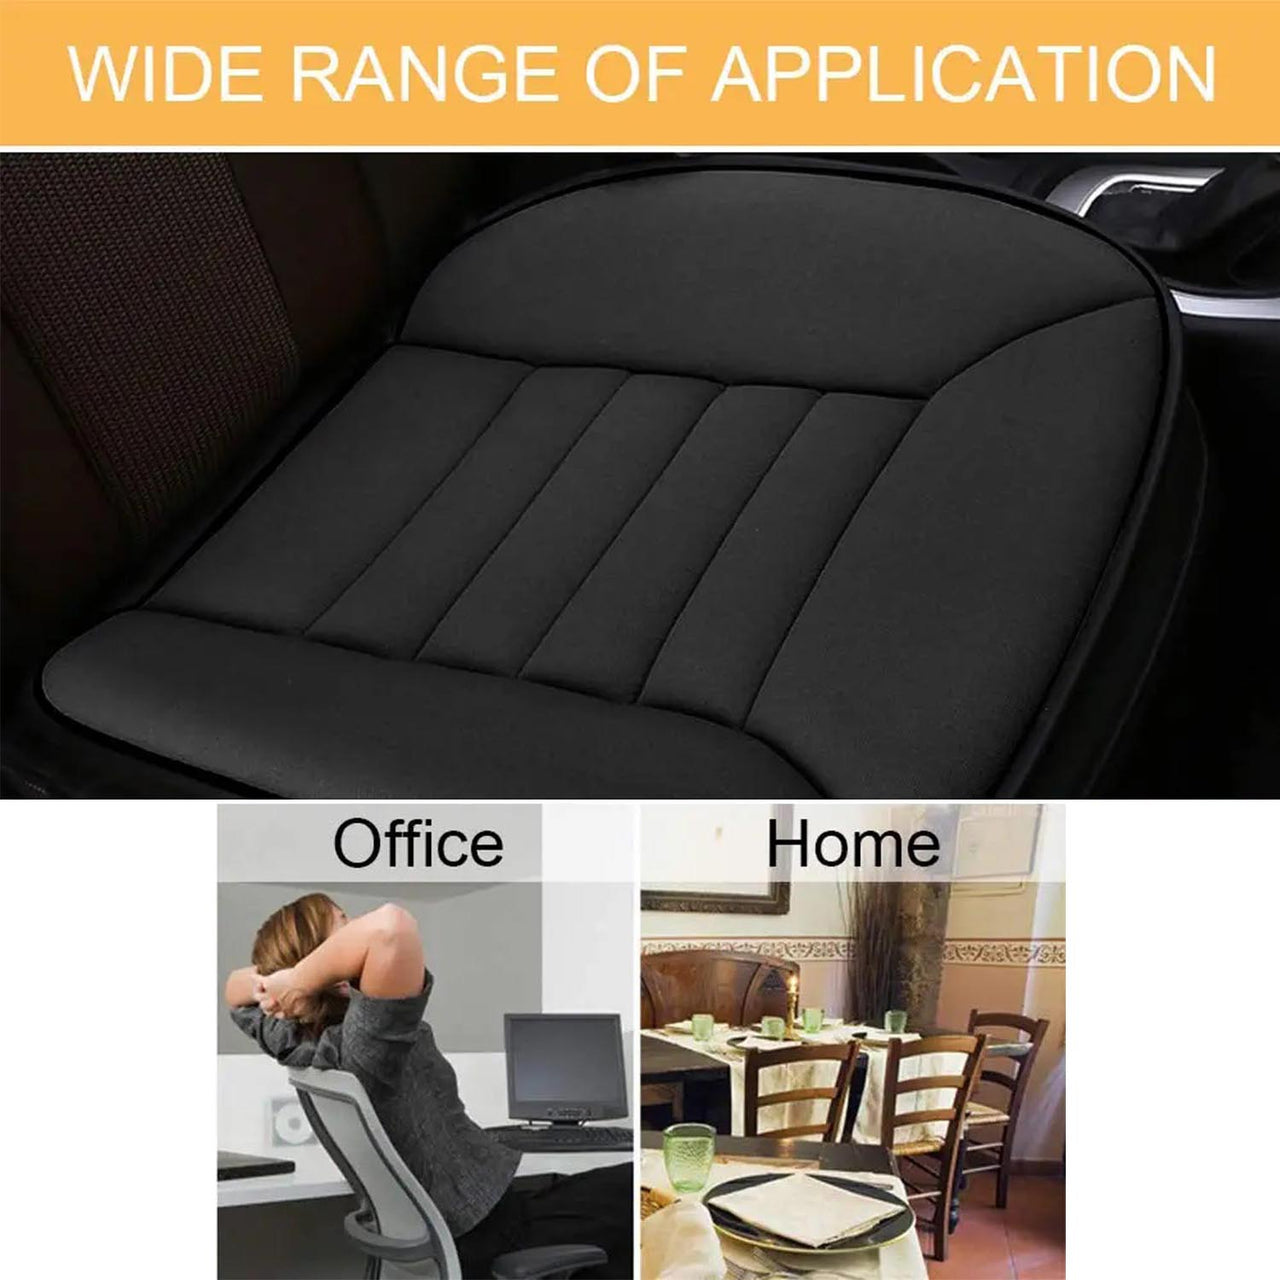 Car Seat Cushion with 1.2inch Comfort Memory Foam, Custom Fit For Your Cars, Seat Cushion for Car and Office Chair LI19989